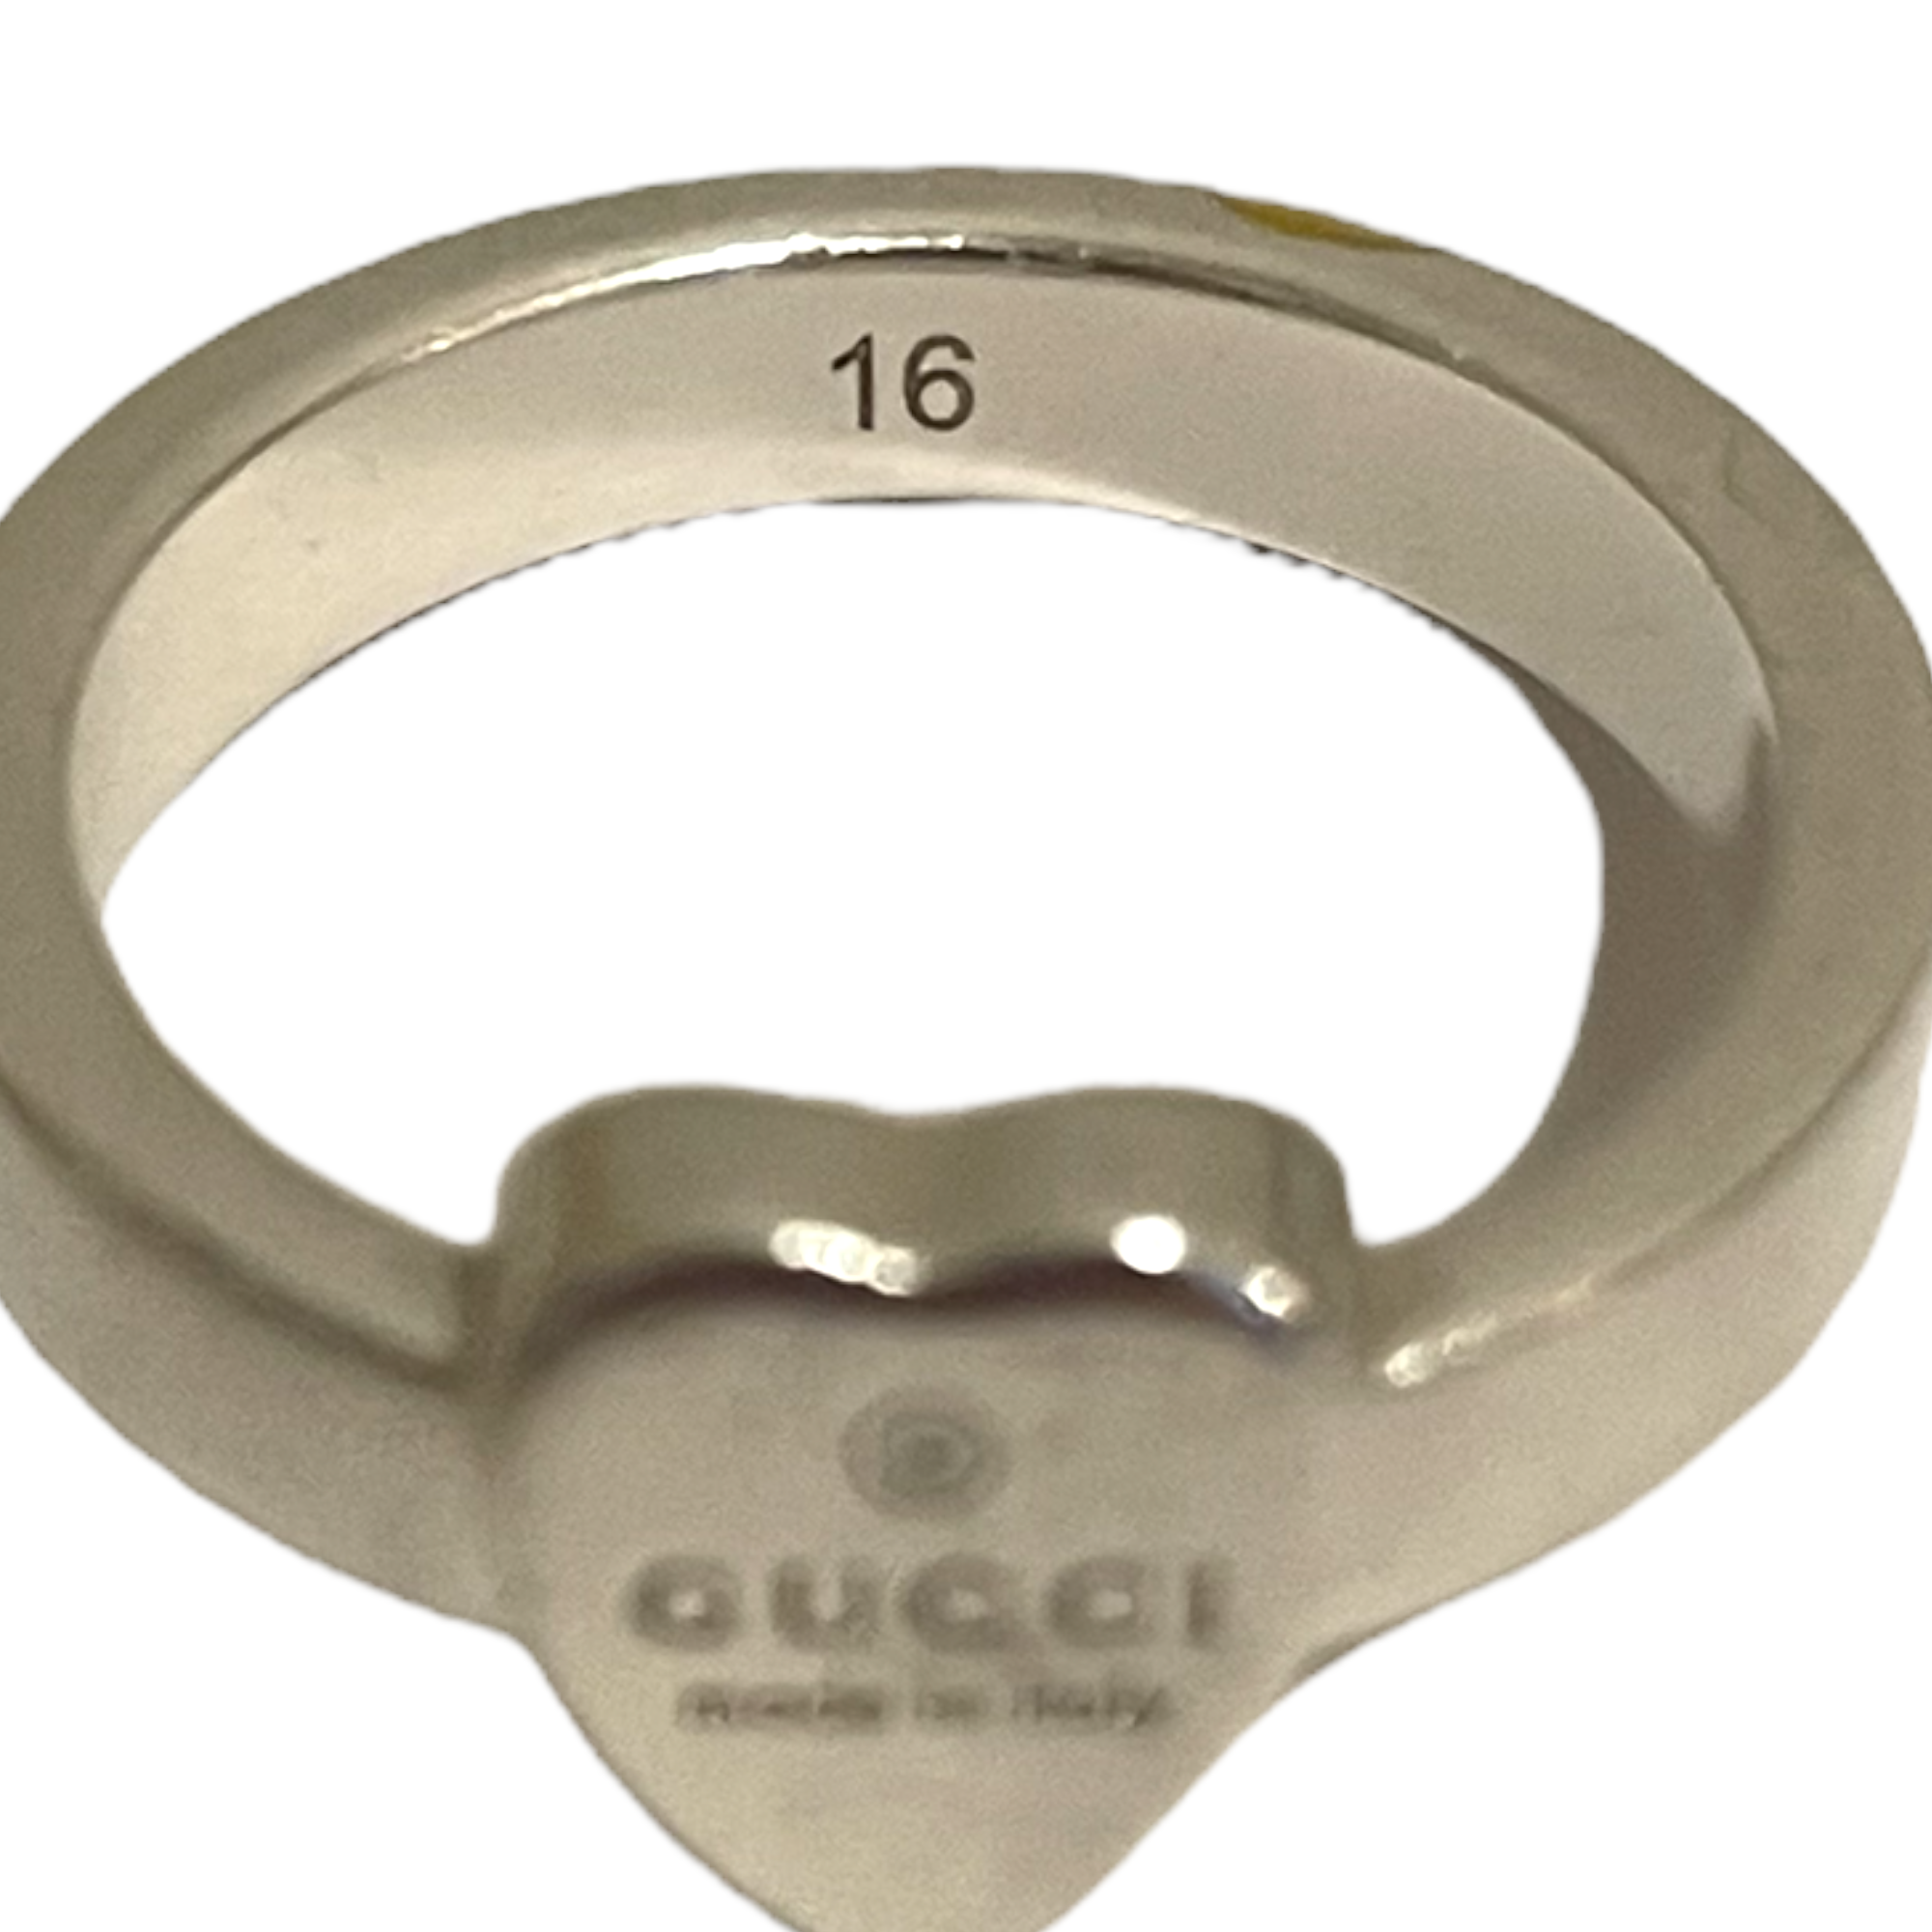 GUCCI Sterling Silver Trademark ring with heart pendant  | Size: GUCCI: 16/ US 7.5 |